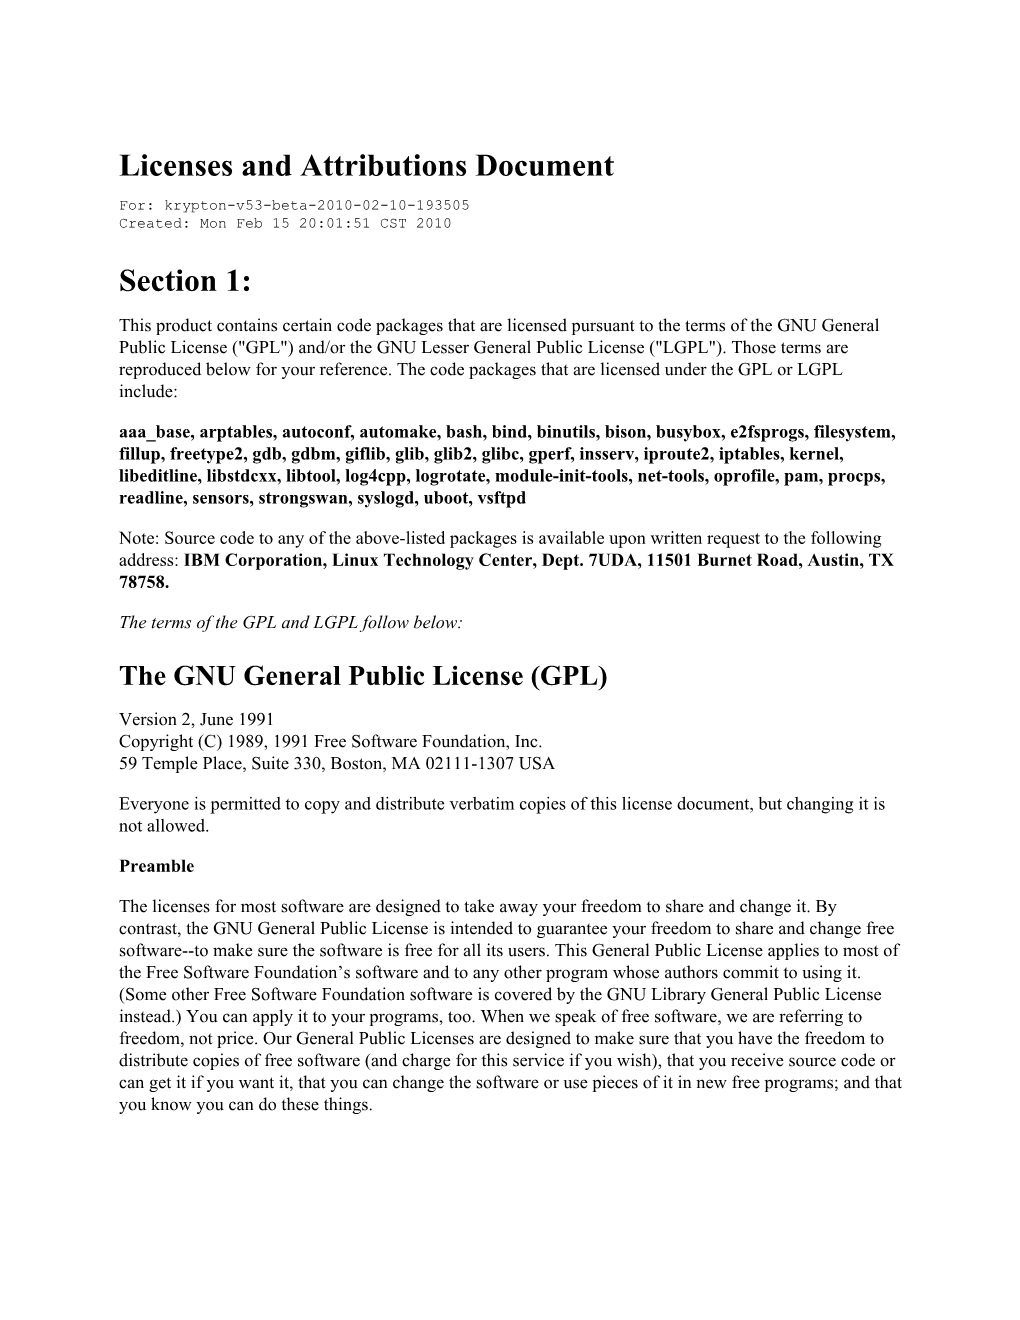 Open Source Software Licenses and Attributions Document